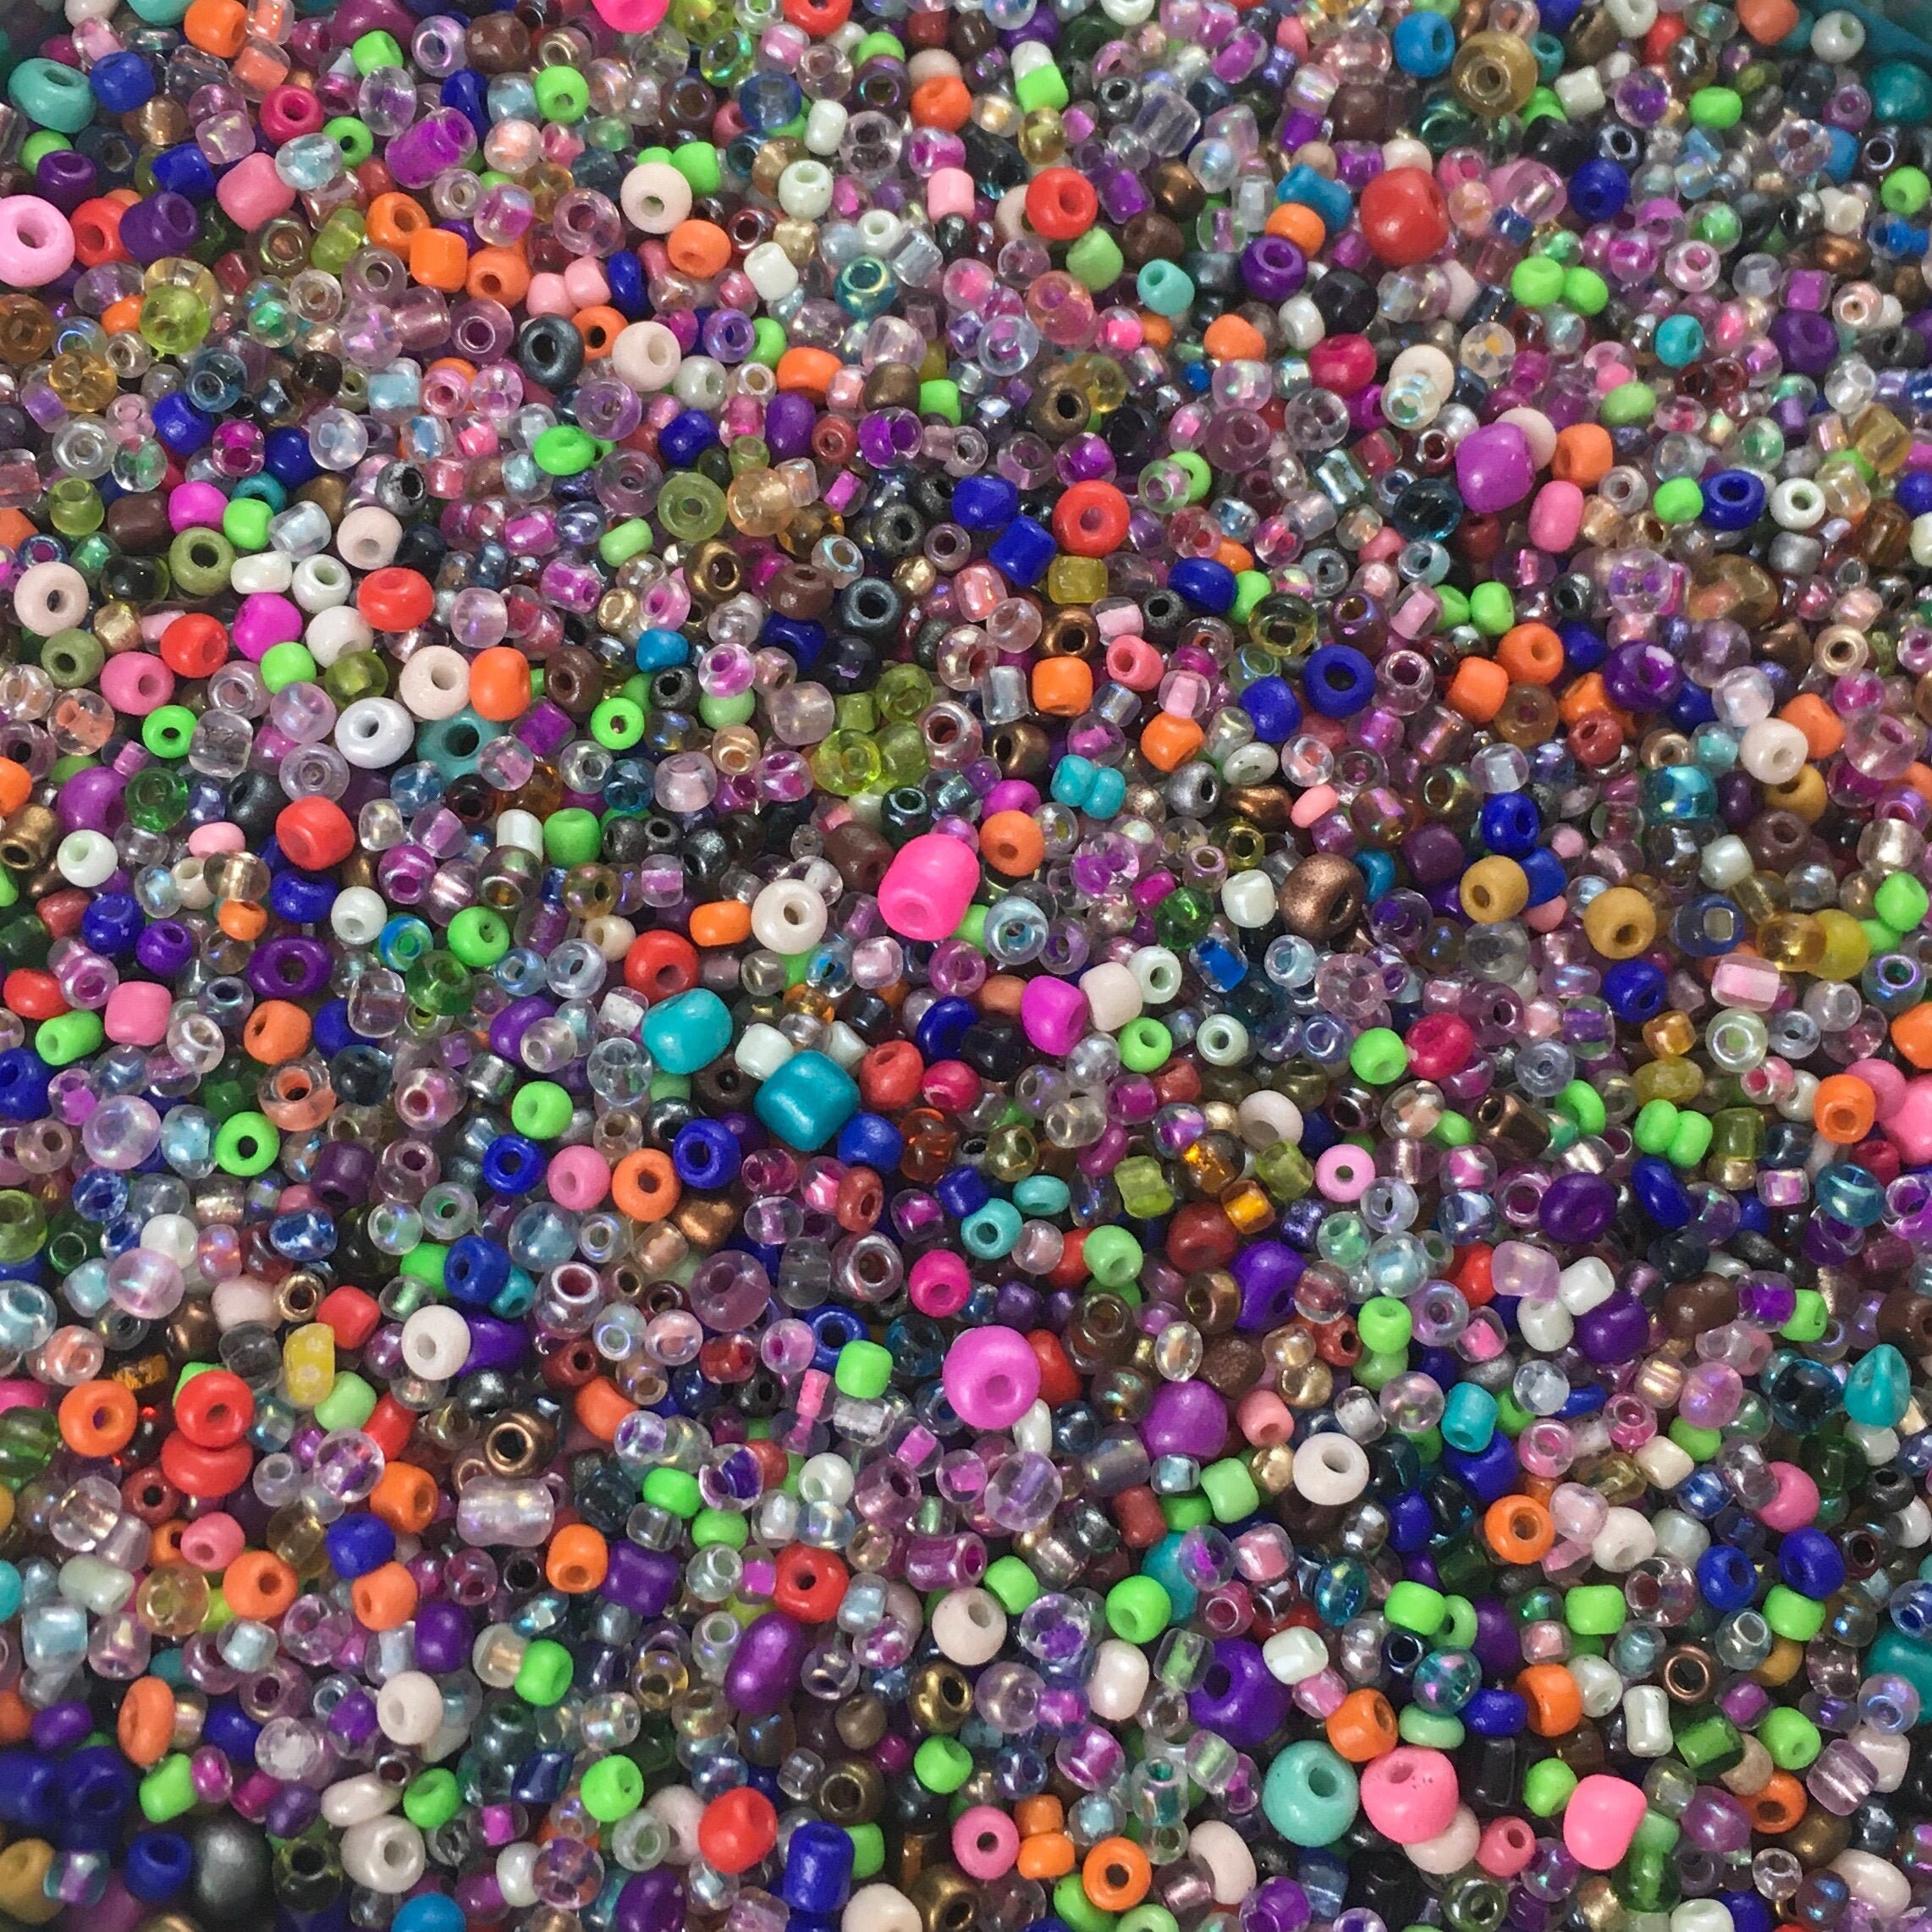 33 Mixed Beads Assorted Colors and Styles